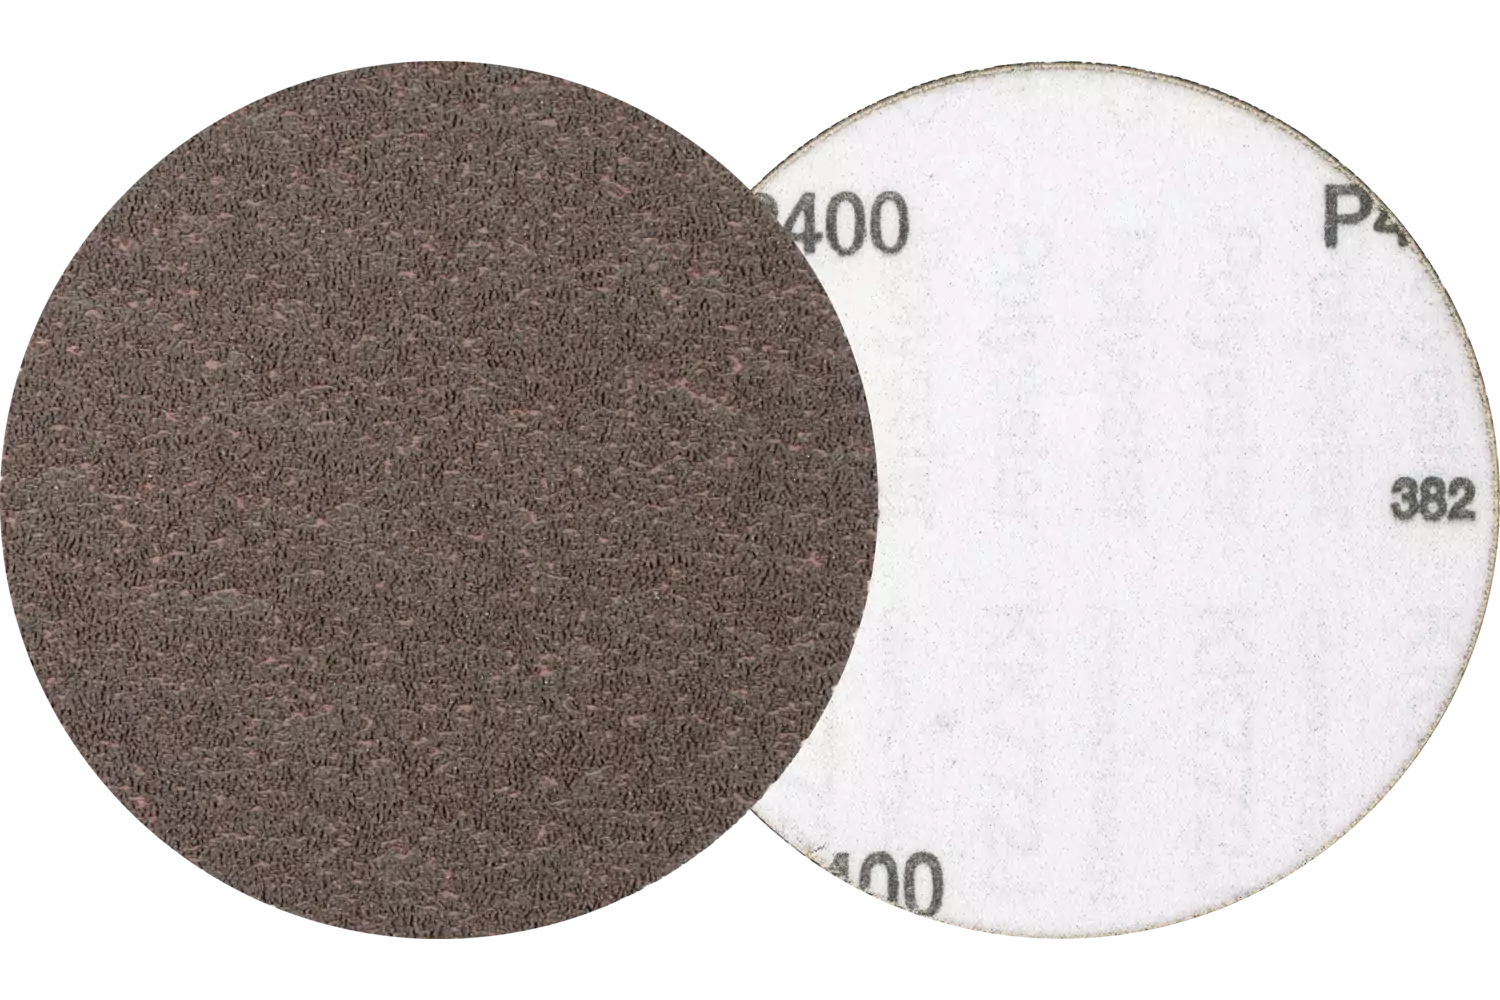 Compact grain self-adhesive disc KR dia. 125 mm A400 CK for fine grinding with an angle grinder